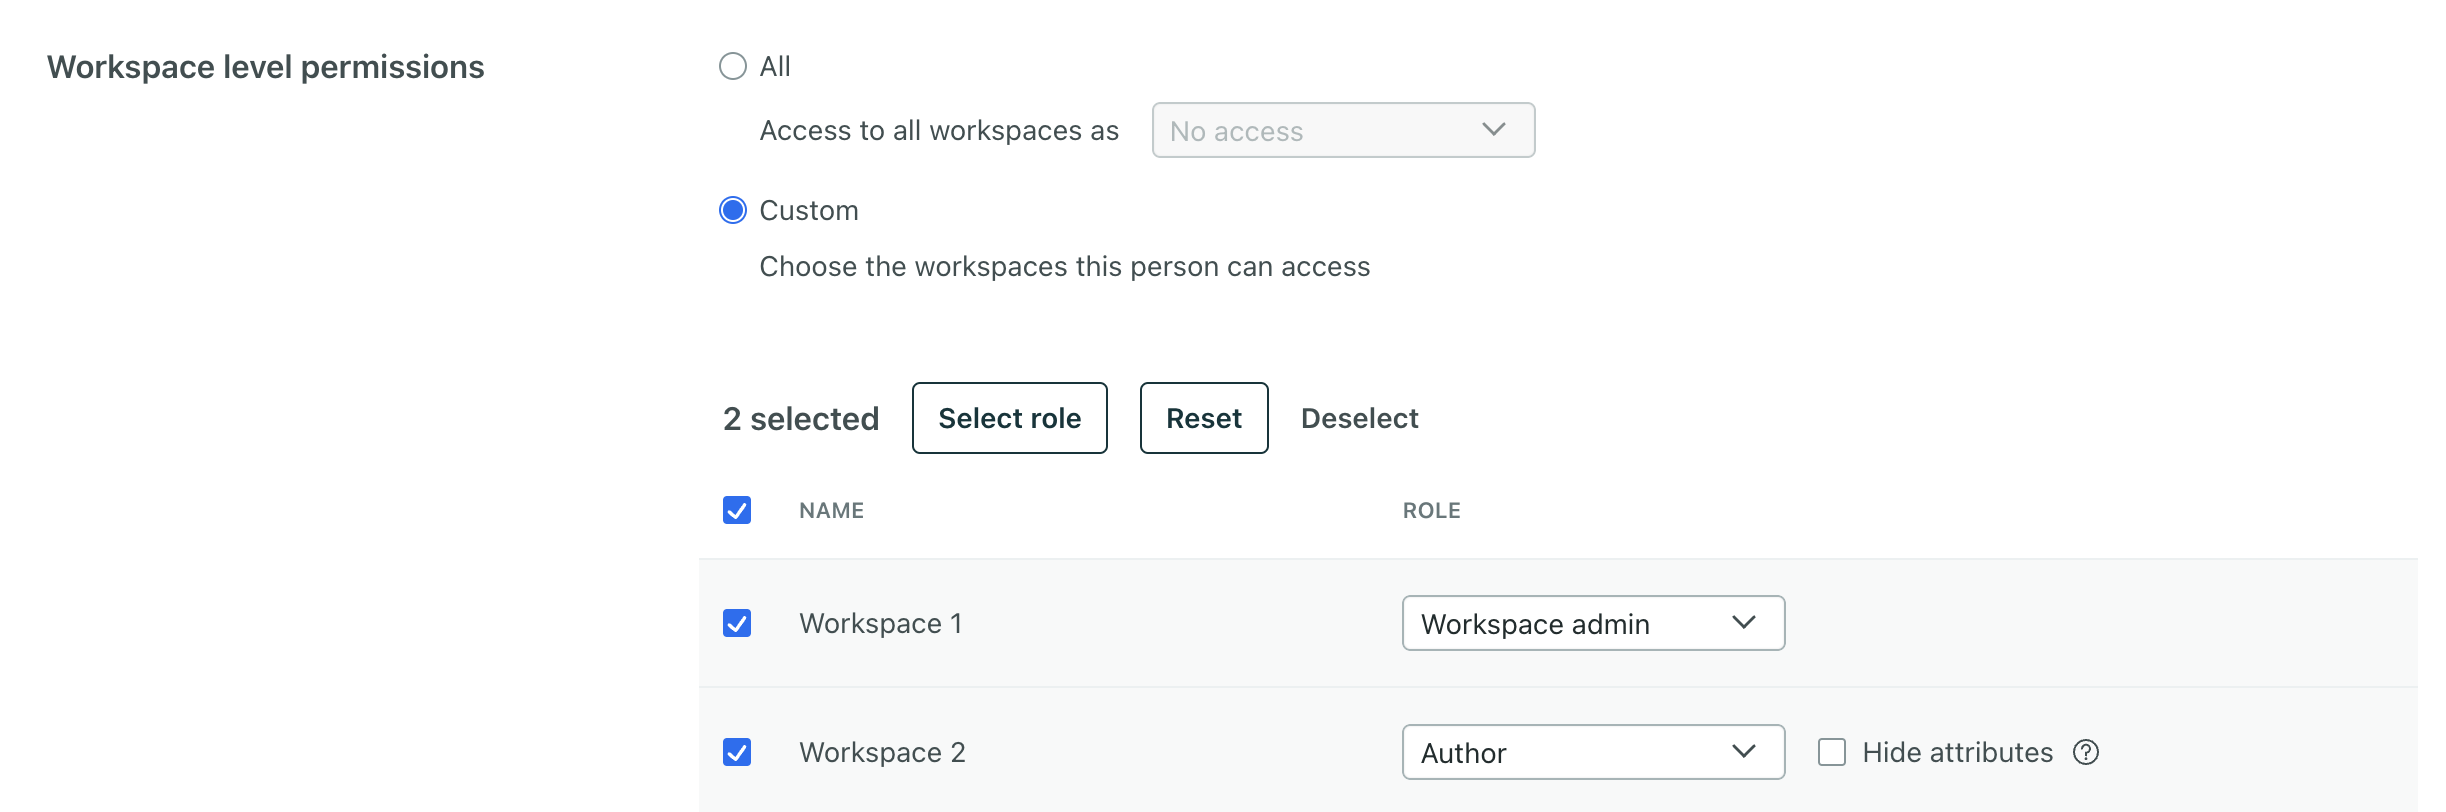 At the bottom of the Invite team member page, there is a a section titled Workspace level permissions. The radial to the left of Custom is selected. Below that is a table with two columns for the name of a workspace and the role the person has in the workspace. The box to the left of each workspace is checked. The first is Workspace 1 and the role Workspace admin is selected. The second is Workspace 2 and the role Author is selected.